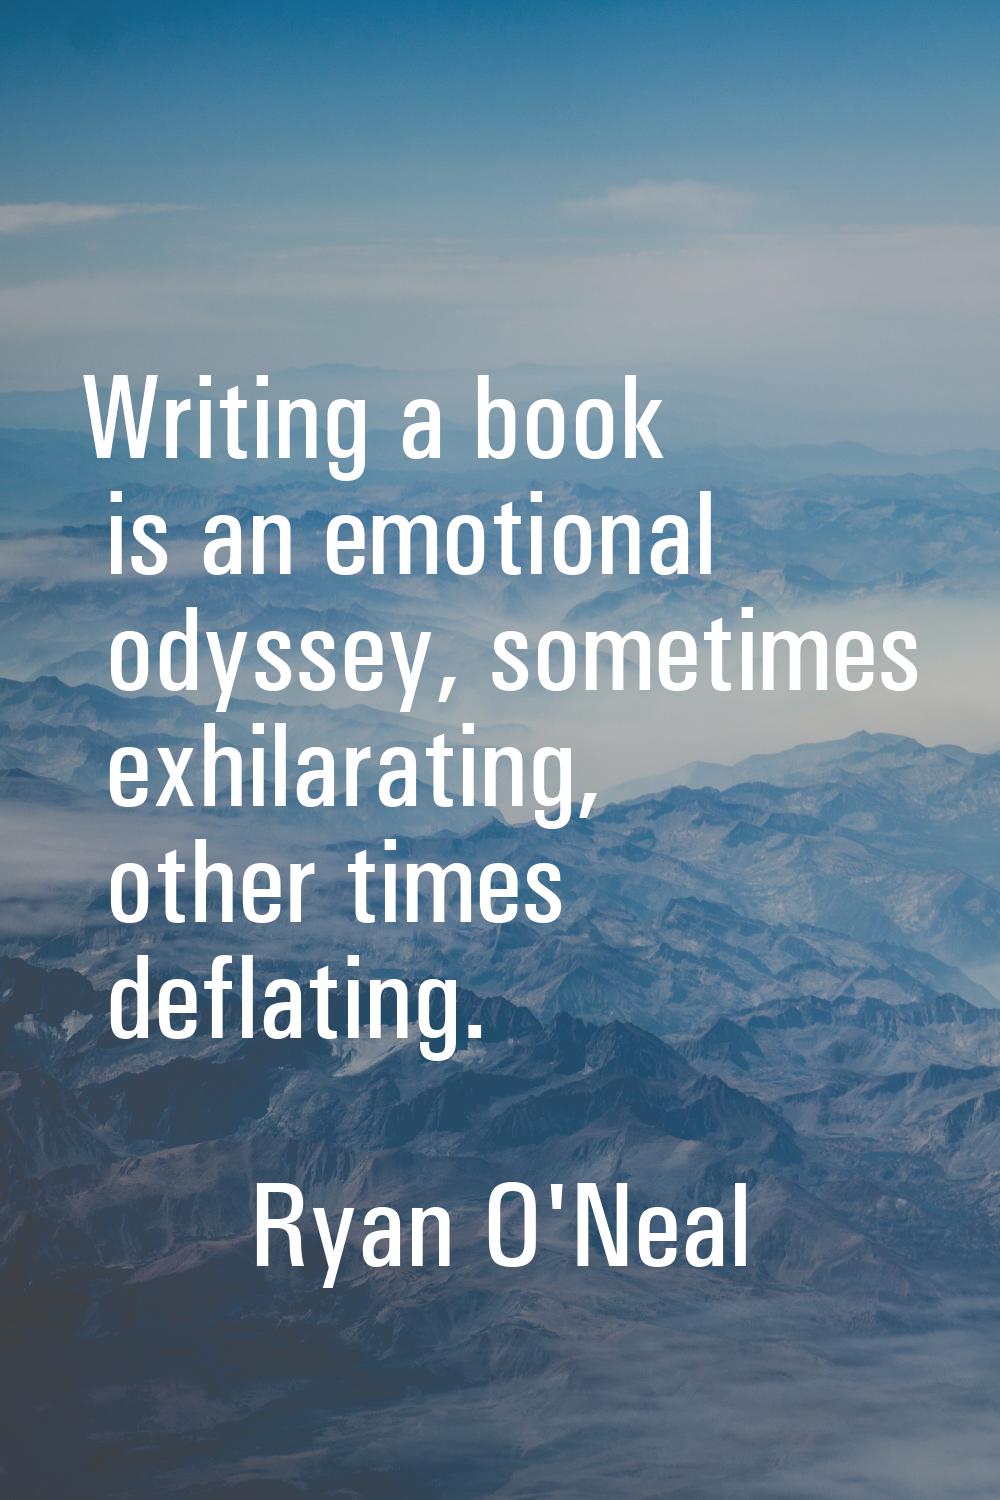 Writing a book is an emotional odyssey, sometimes exhilarating, other times deflating.